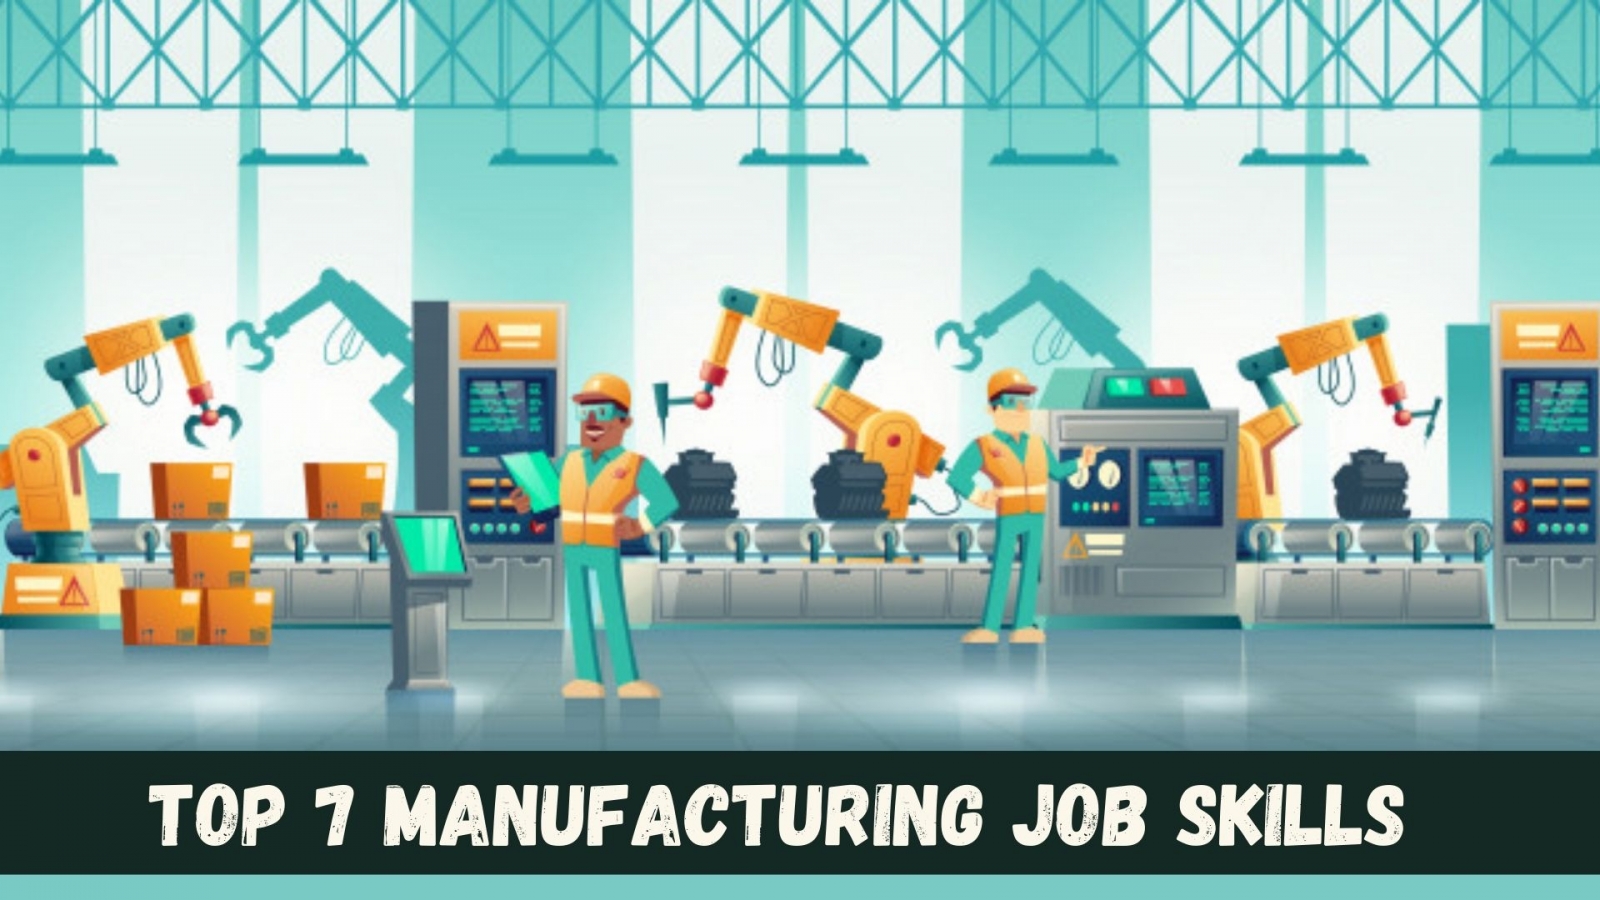 Top 7 Manufacturing Job Skills for the Post-COVID Era